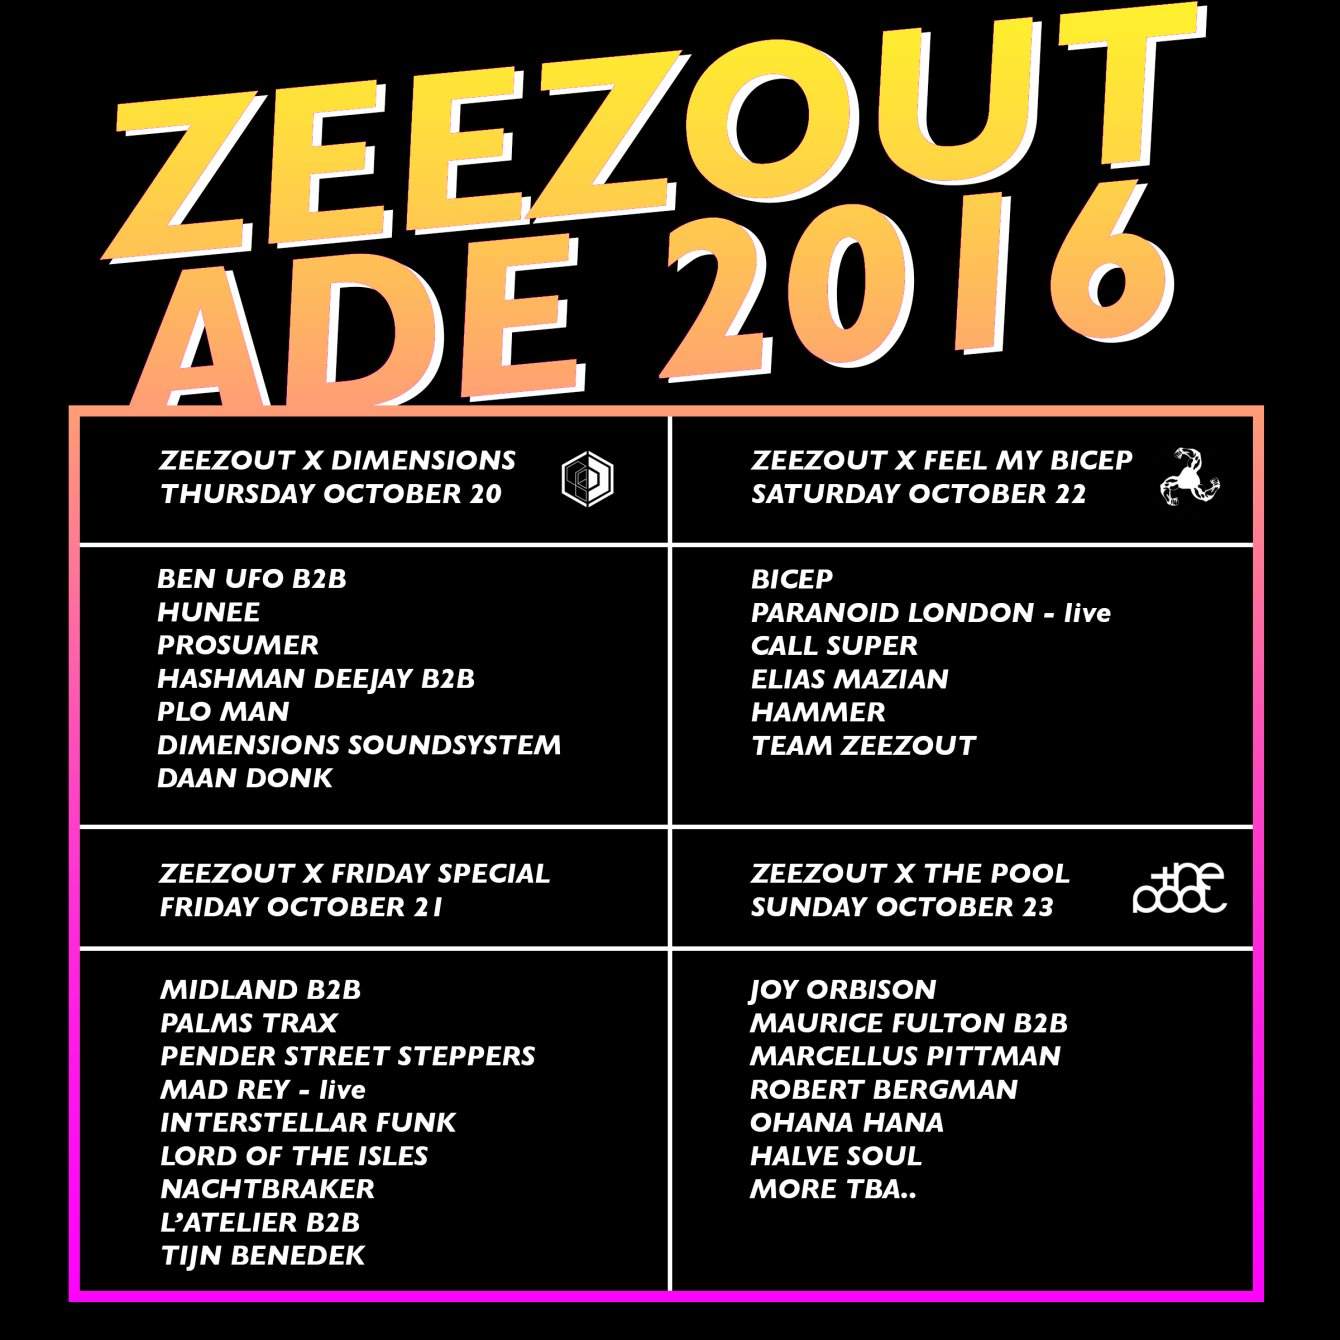 Zeezout ADE 2016: Midland, Palms Trax, Pender Street Steppers & More - フライヤー表